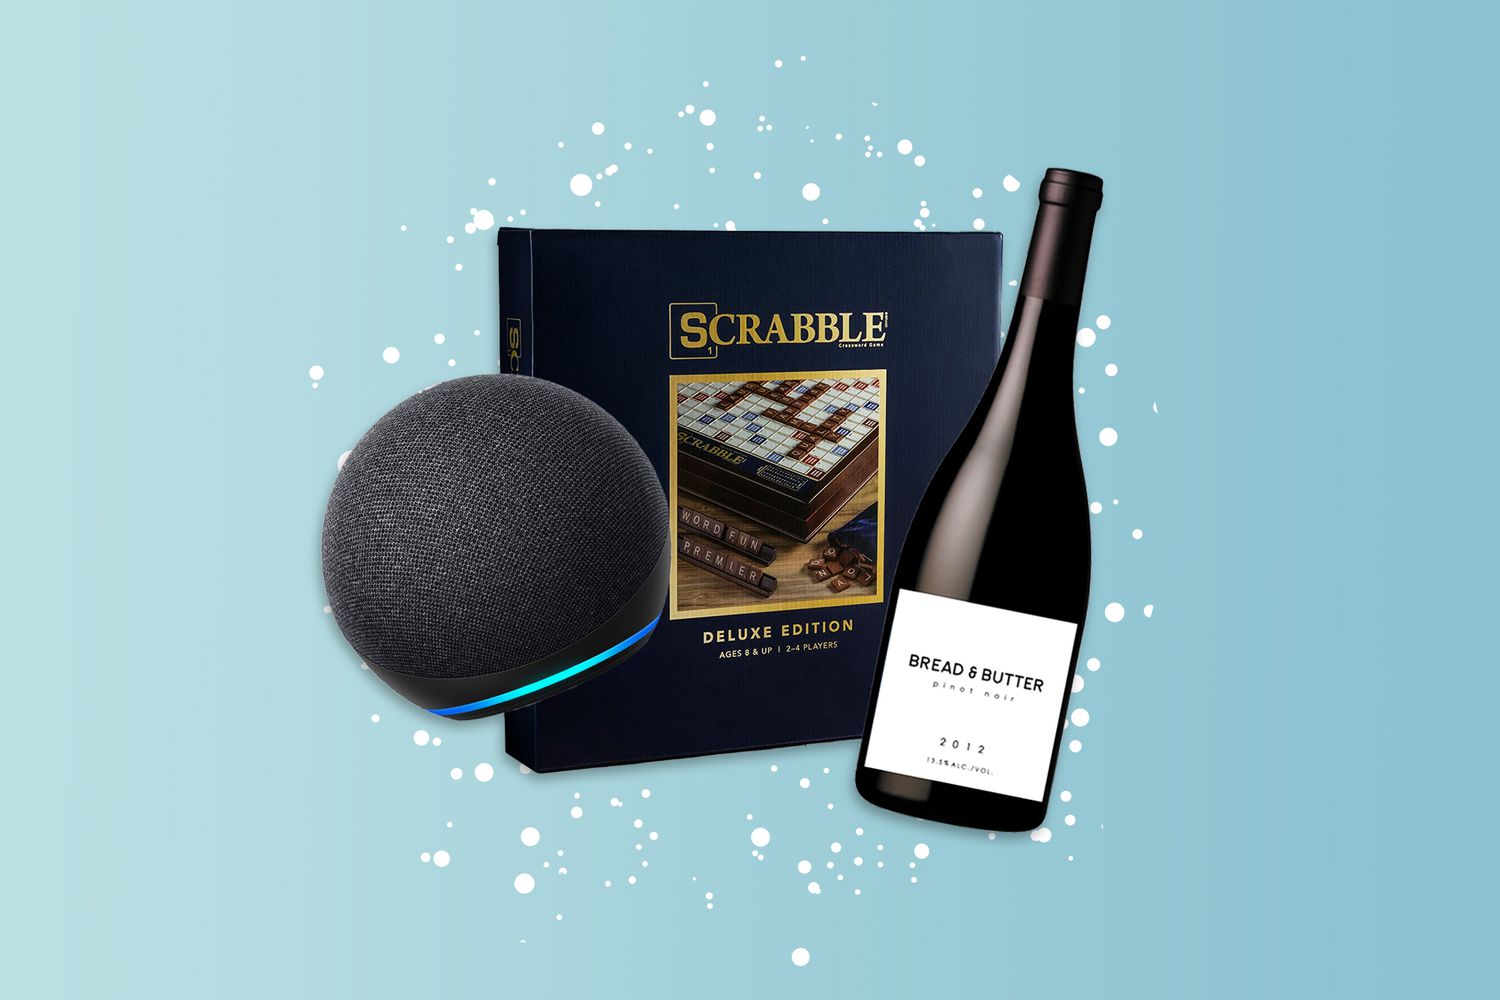 scrabble, a speaker, and a bottle of wine on a designed background